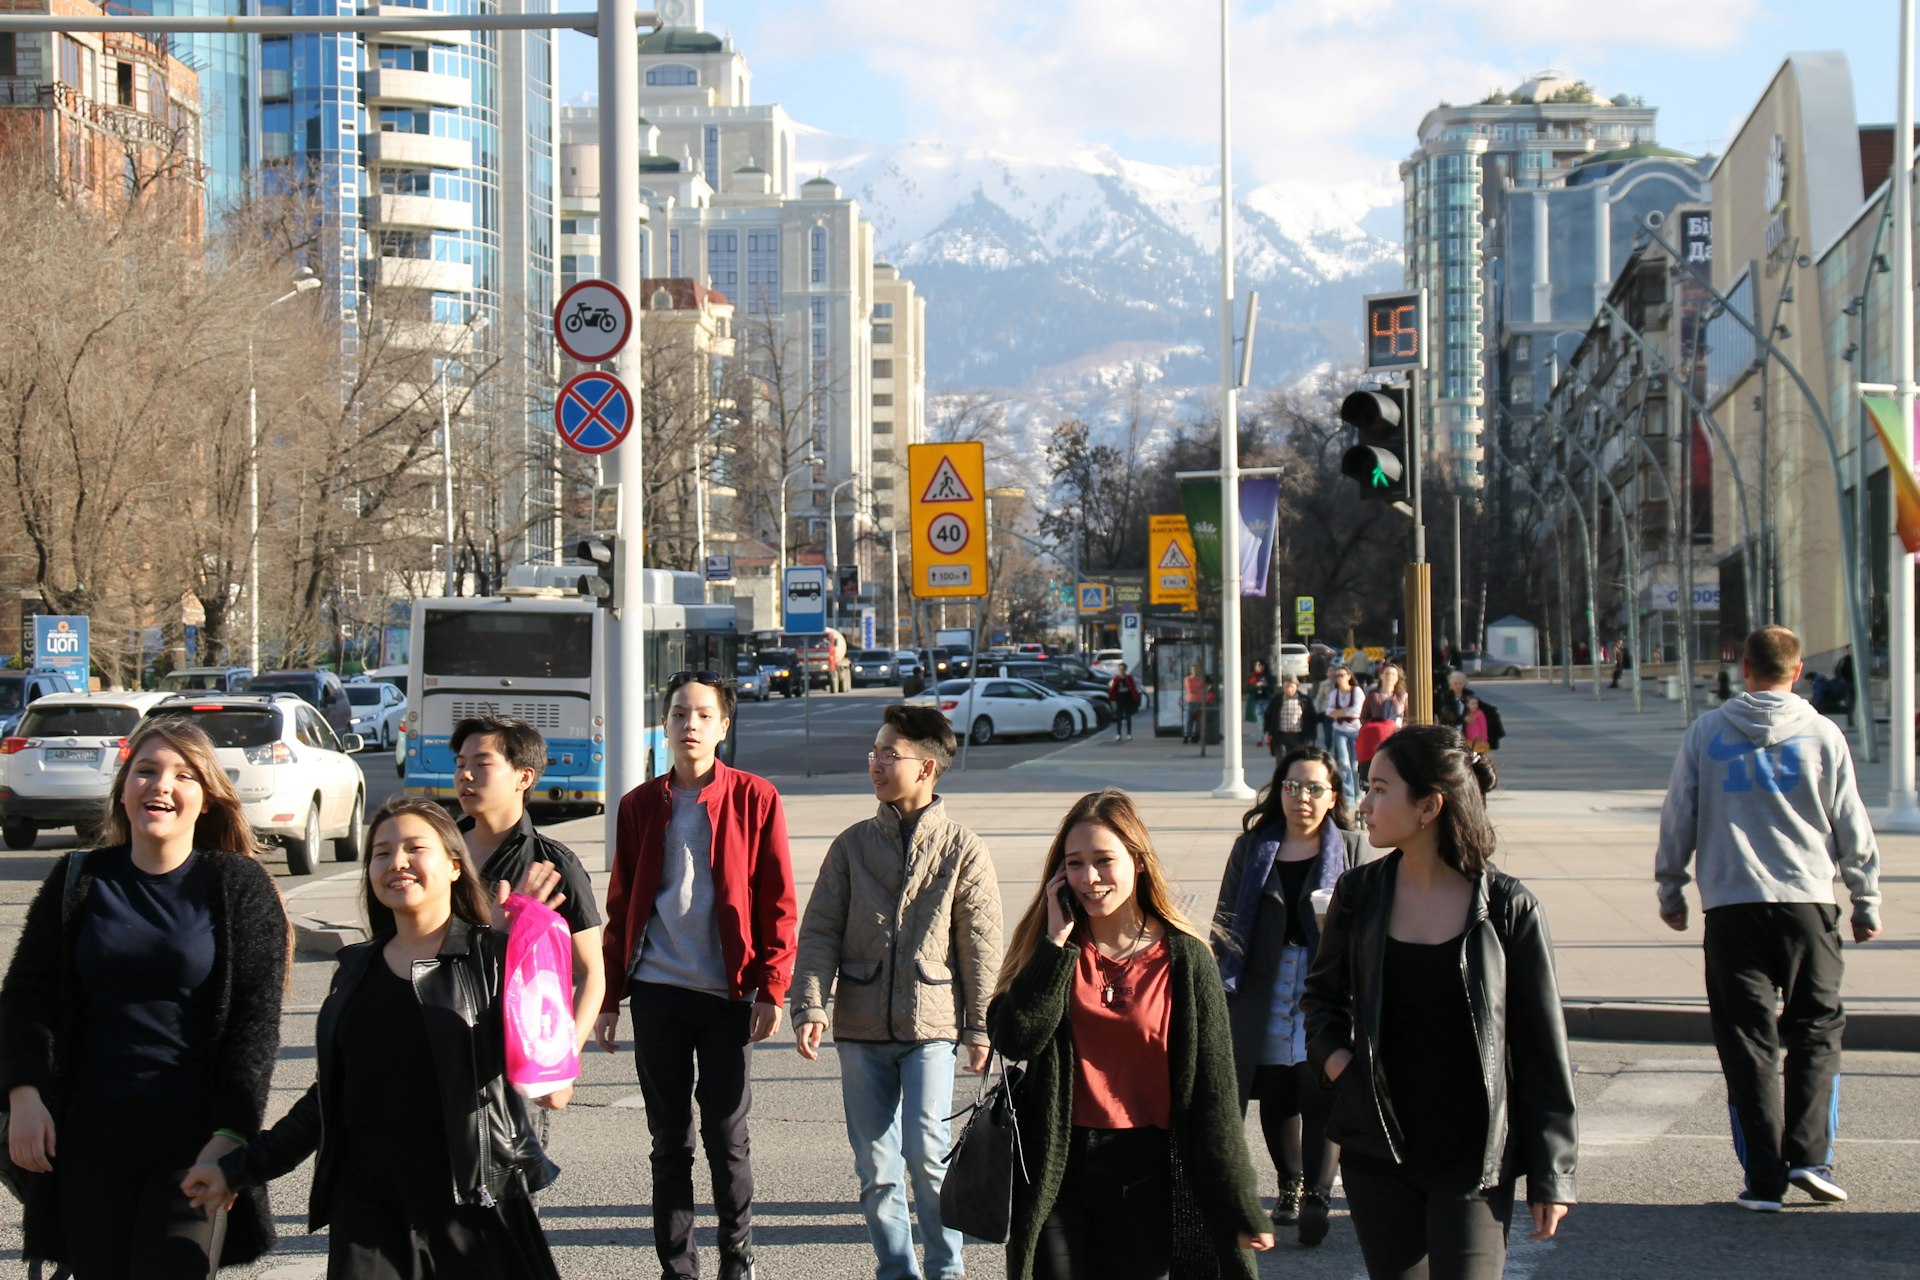 Local Kazakh people walking in the streets among tall buildings with a view of snow-capped peaks in the distance, Almaty, Kazakhstan